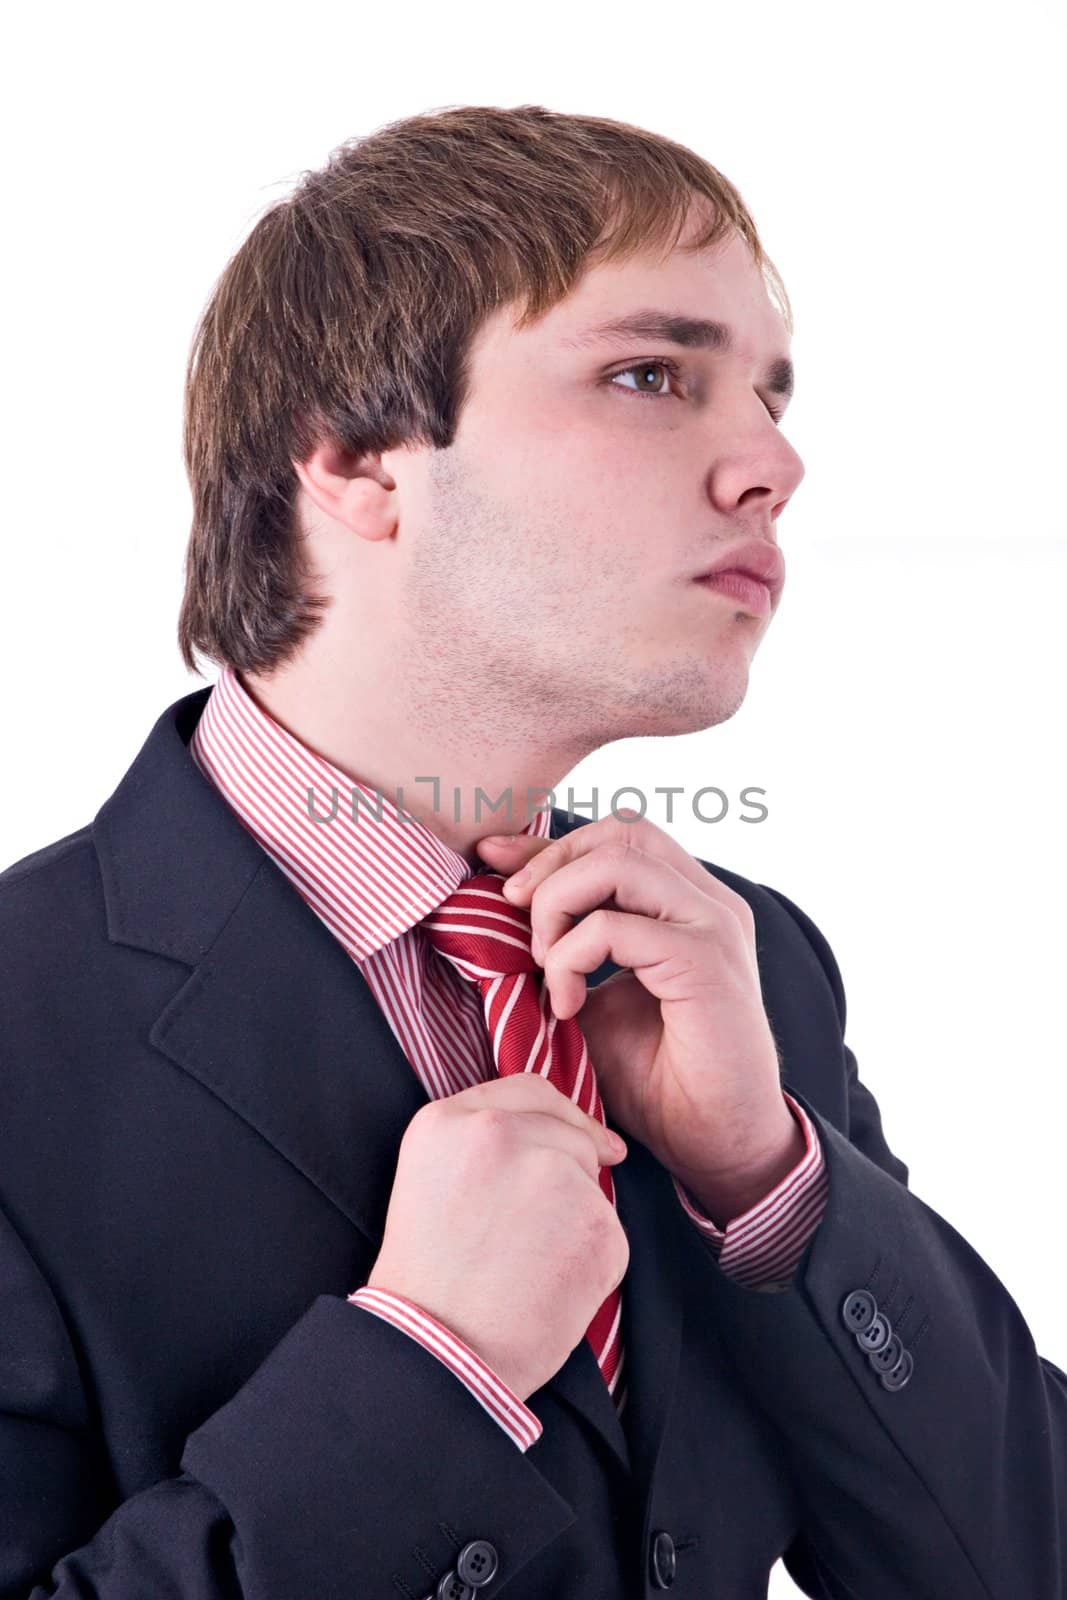 Young man wearing suit, adjusting tie. Isolated on white.